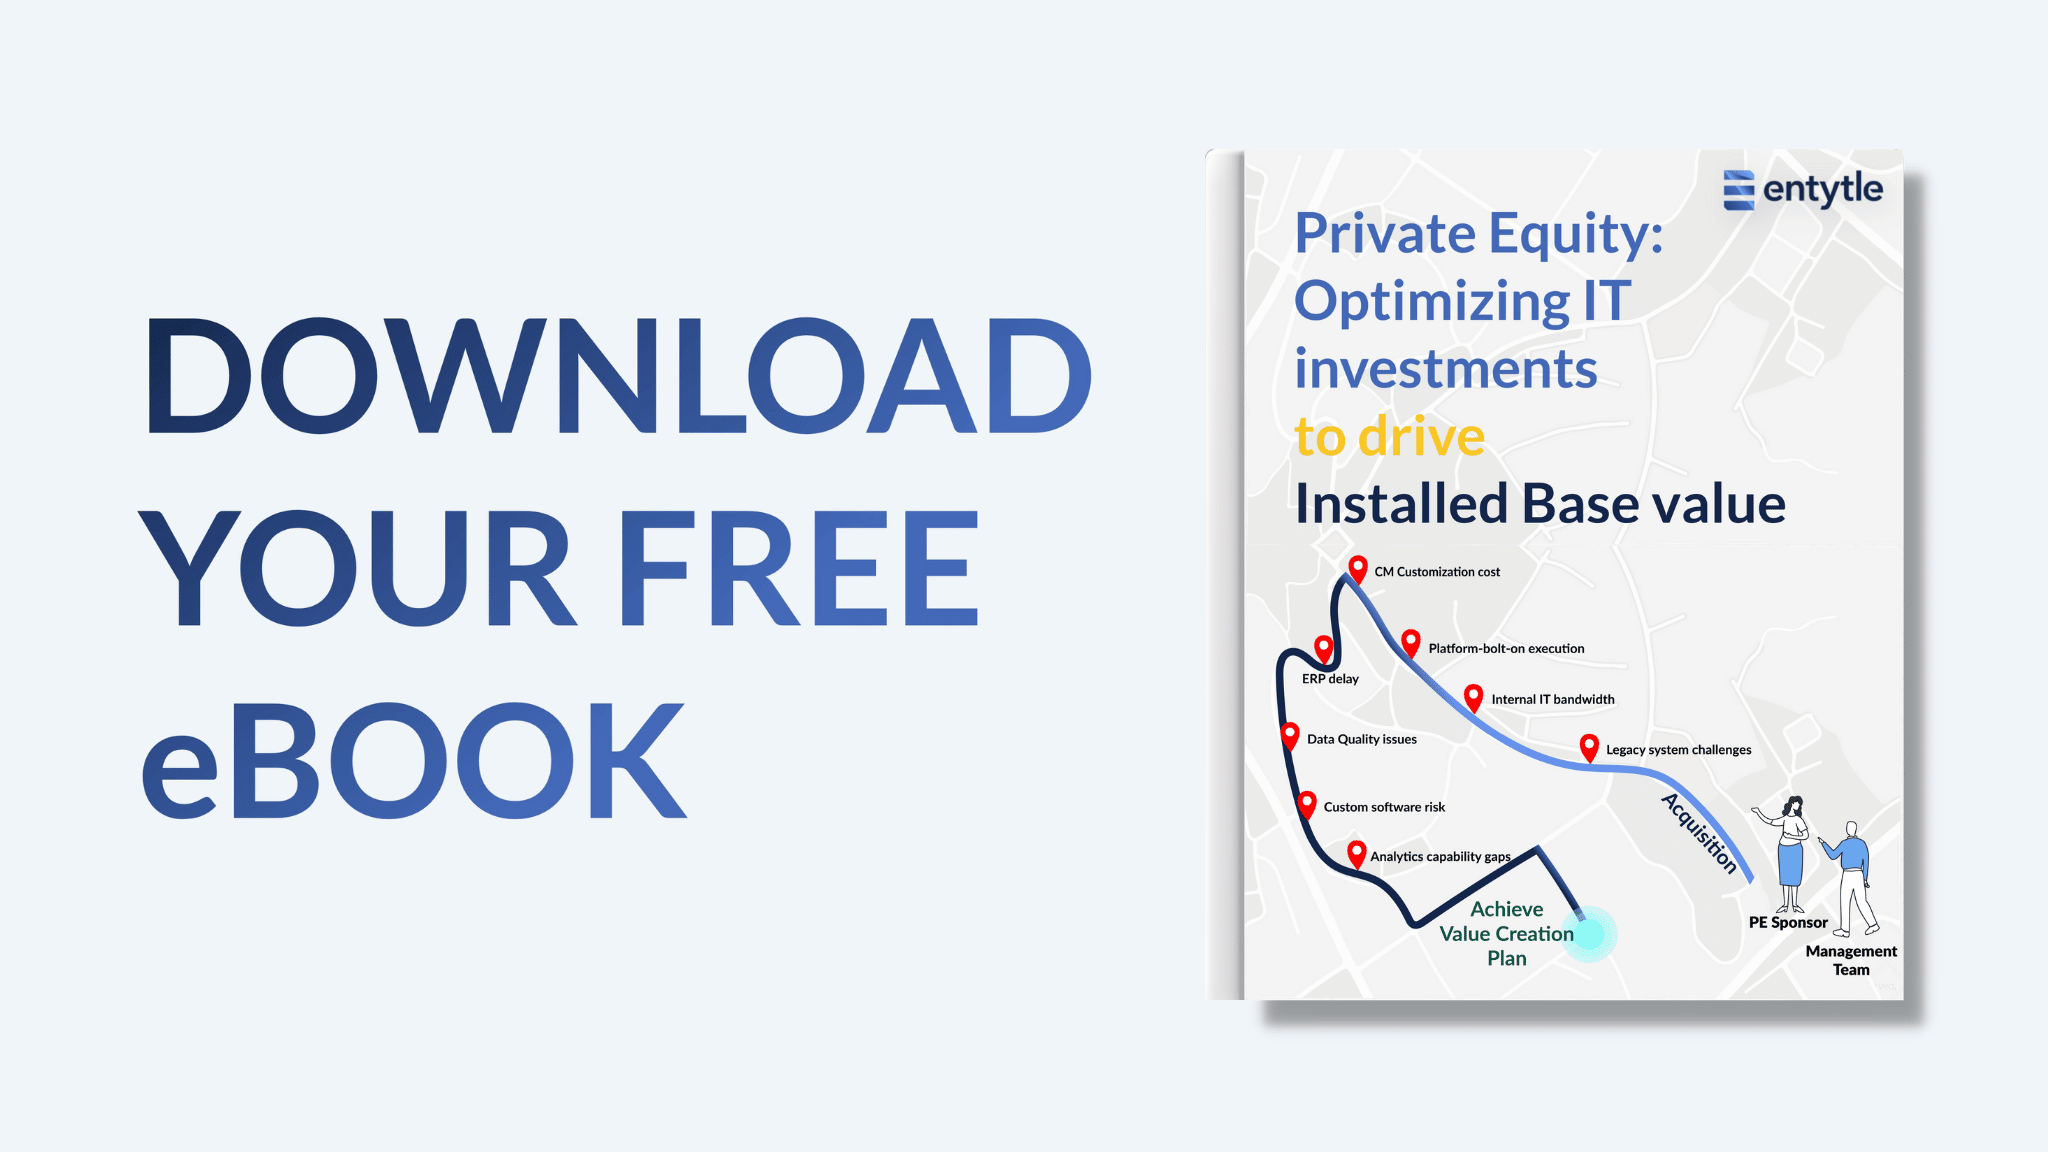 Private Equity: Optimizing IT investments to drive Installed Base value